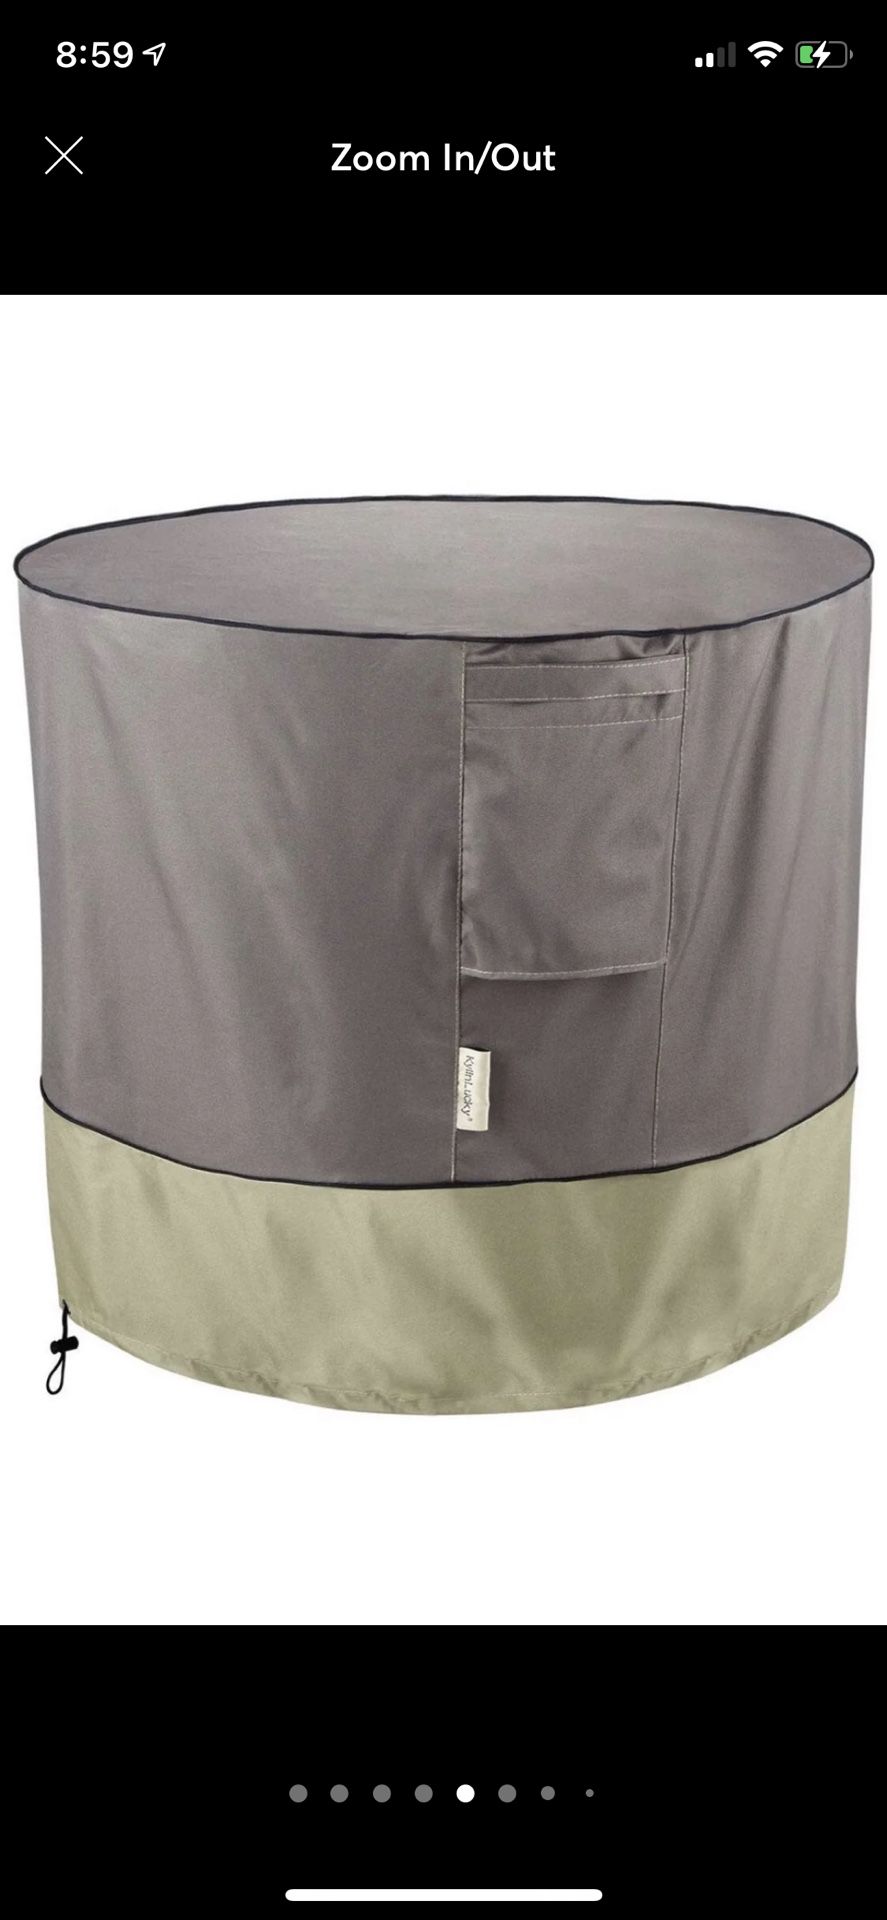 Brand-new!!! Air Conditioner Cover for Outside Units - AC Covers Fits up to 34 x 30 inches (Round)